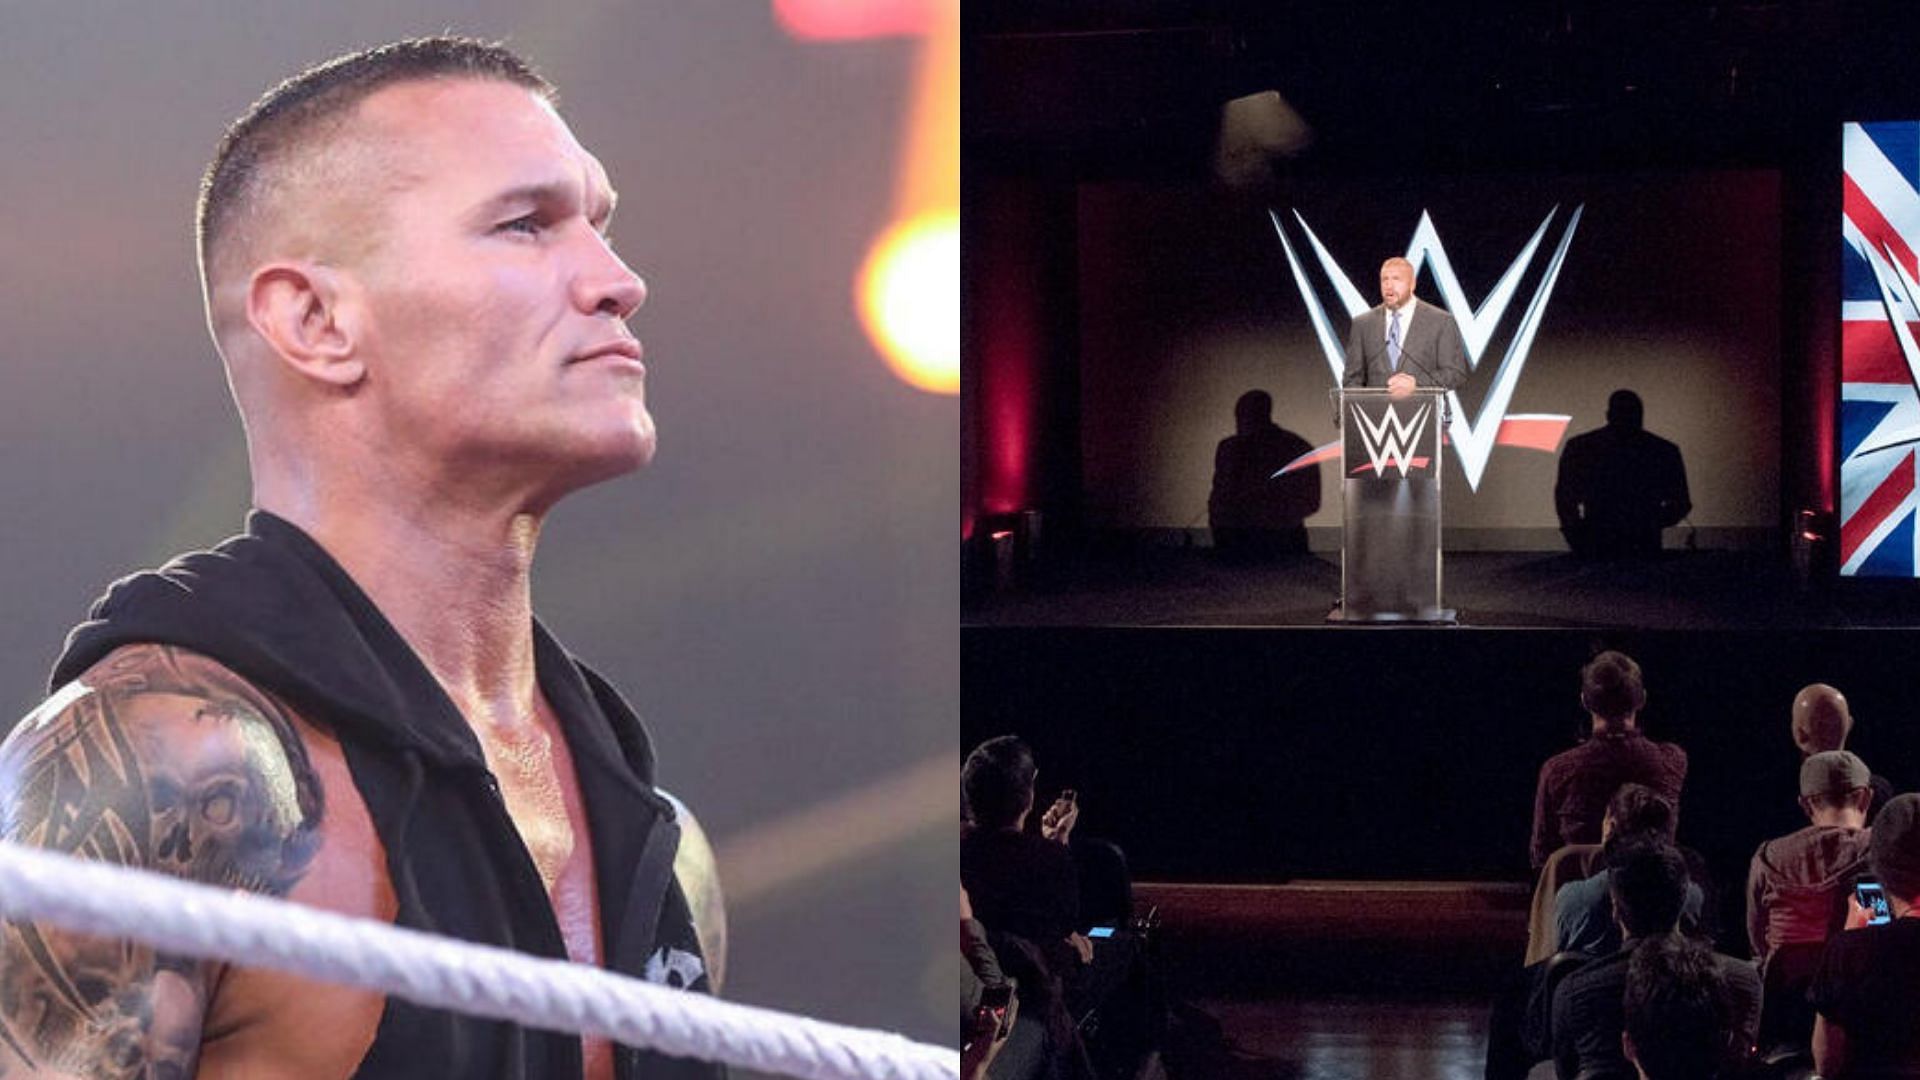 WWE officially makes huge announcement ending decades-long rule in first-ever company move; Randy Orton makes statement